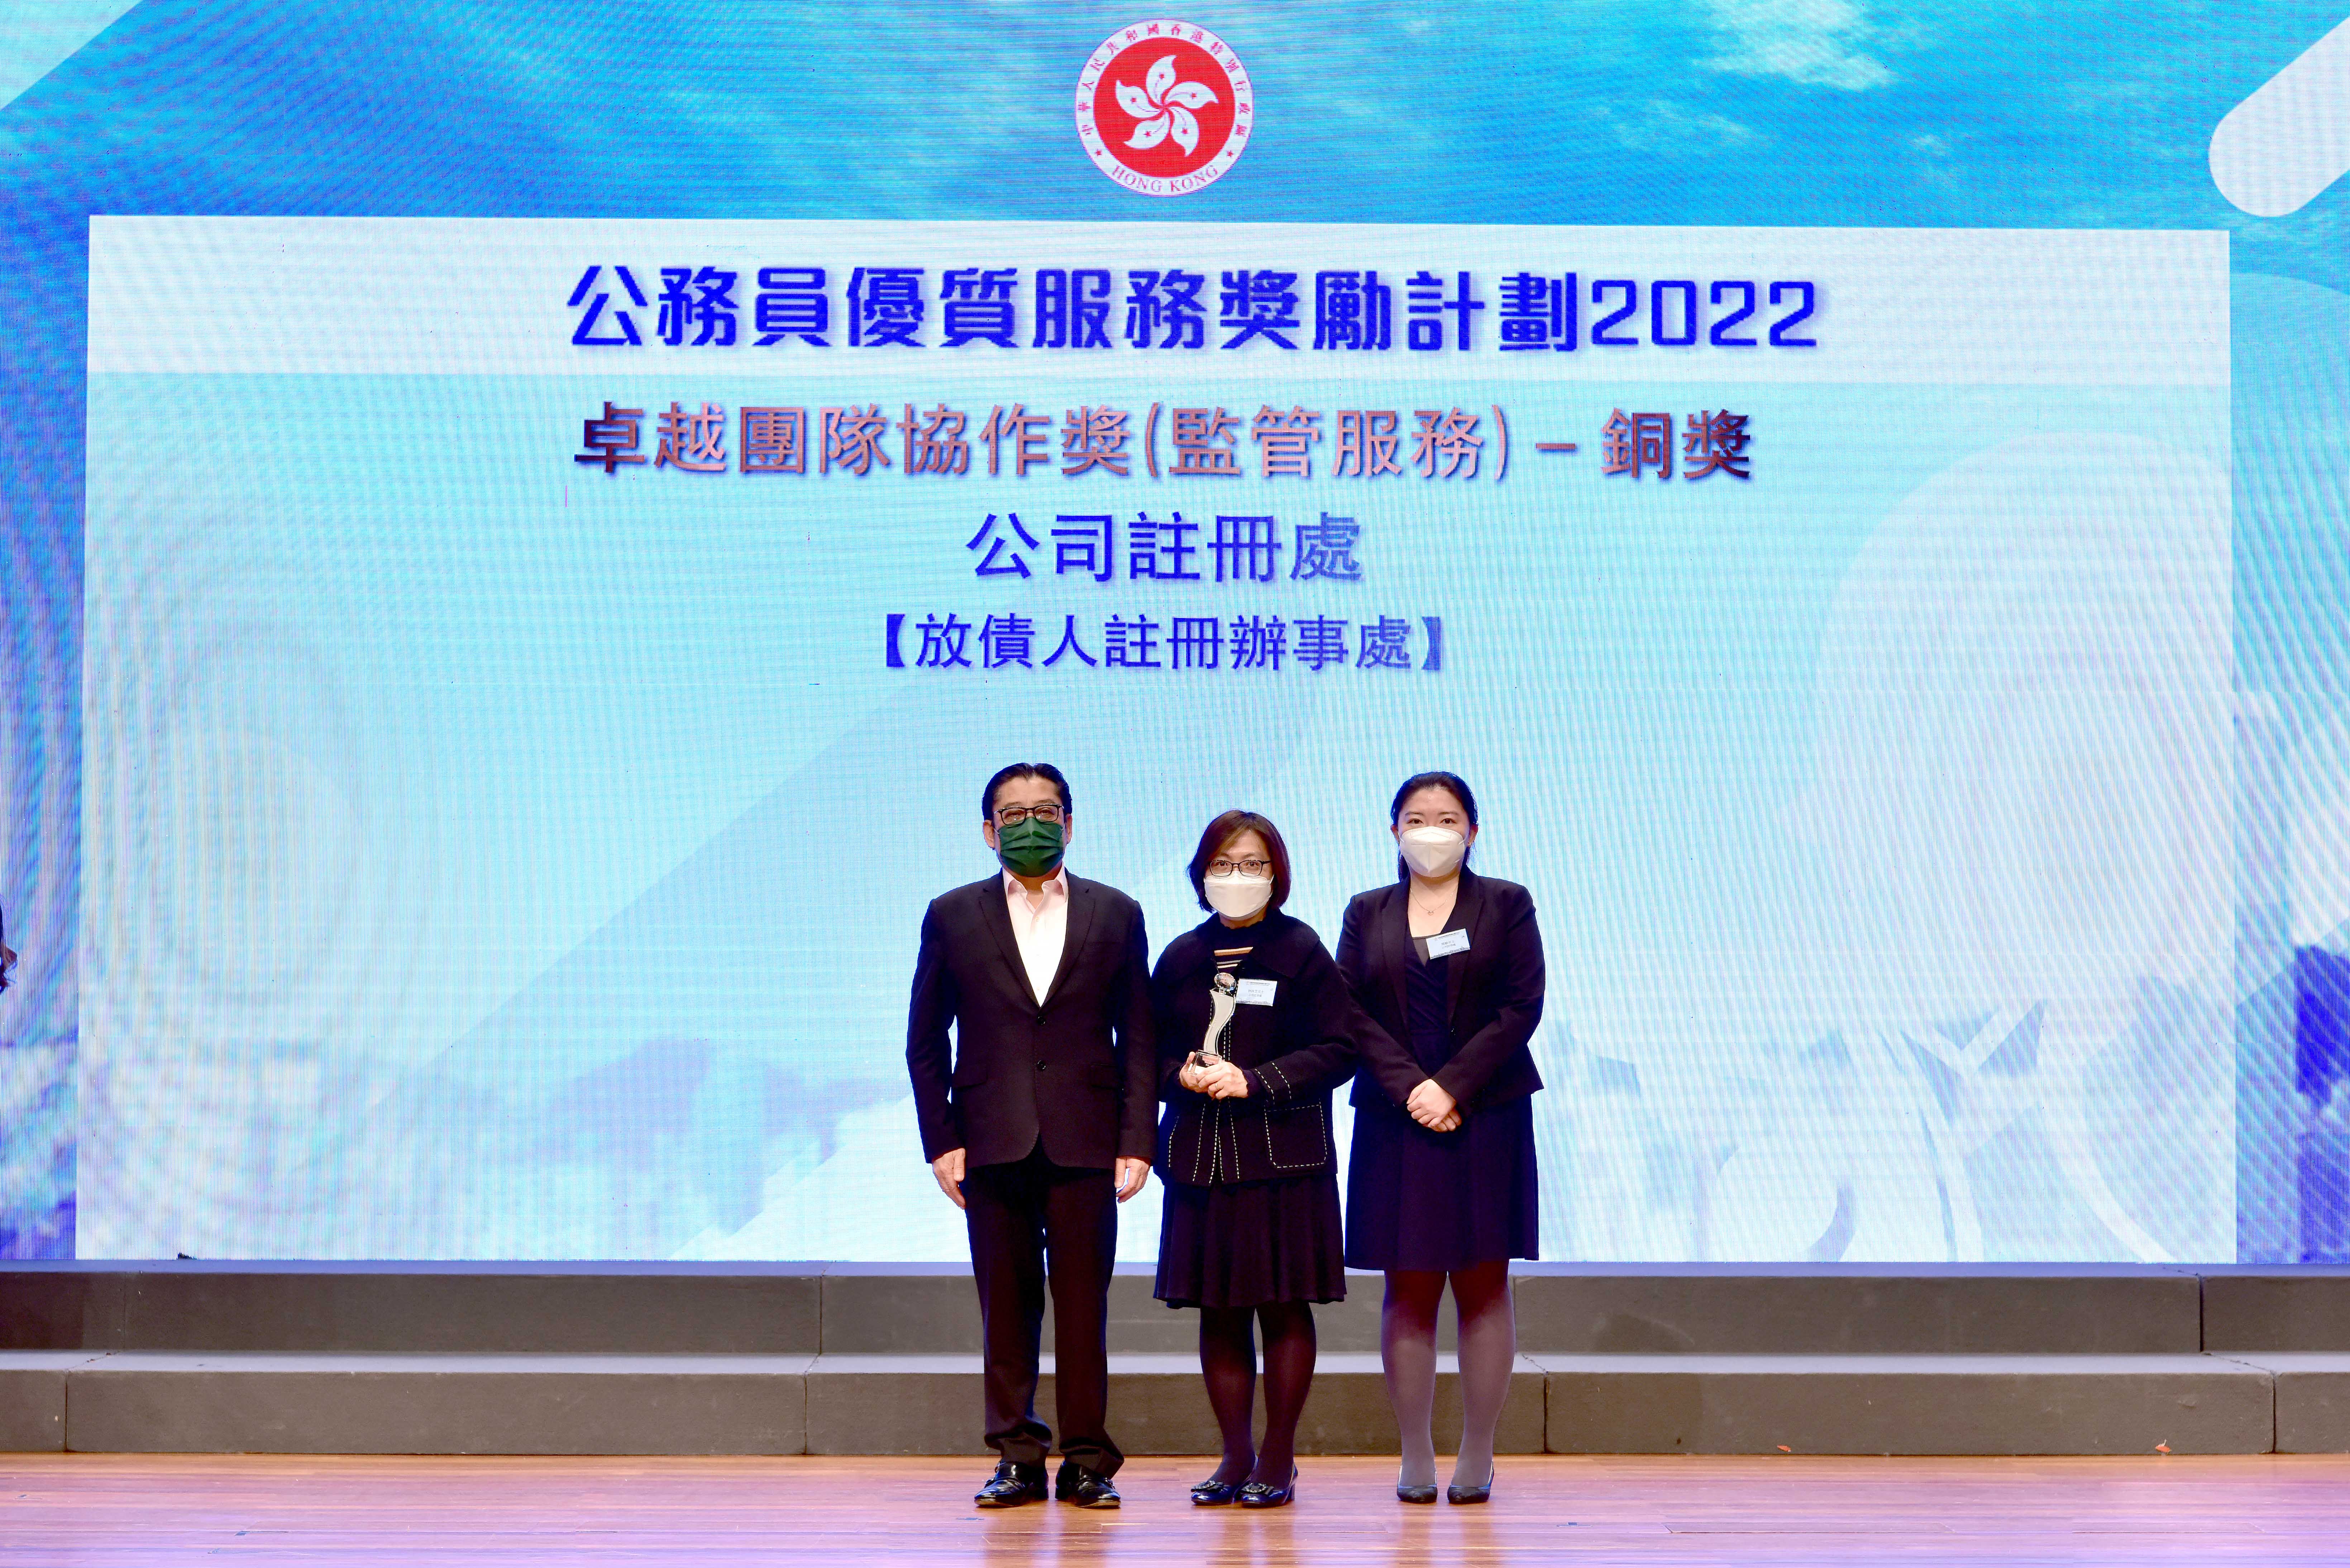 Ms Fanny Lam, Deputy Registry Manager (centre), accompanied by Miss Maggie Chow, Assistant Registry Manager (right), received the Bronze Prize of the Excellence in Team Collaboration Award (Regulatory Service) at the Prize Presentation Ceremony.